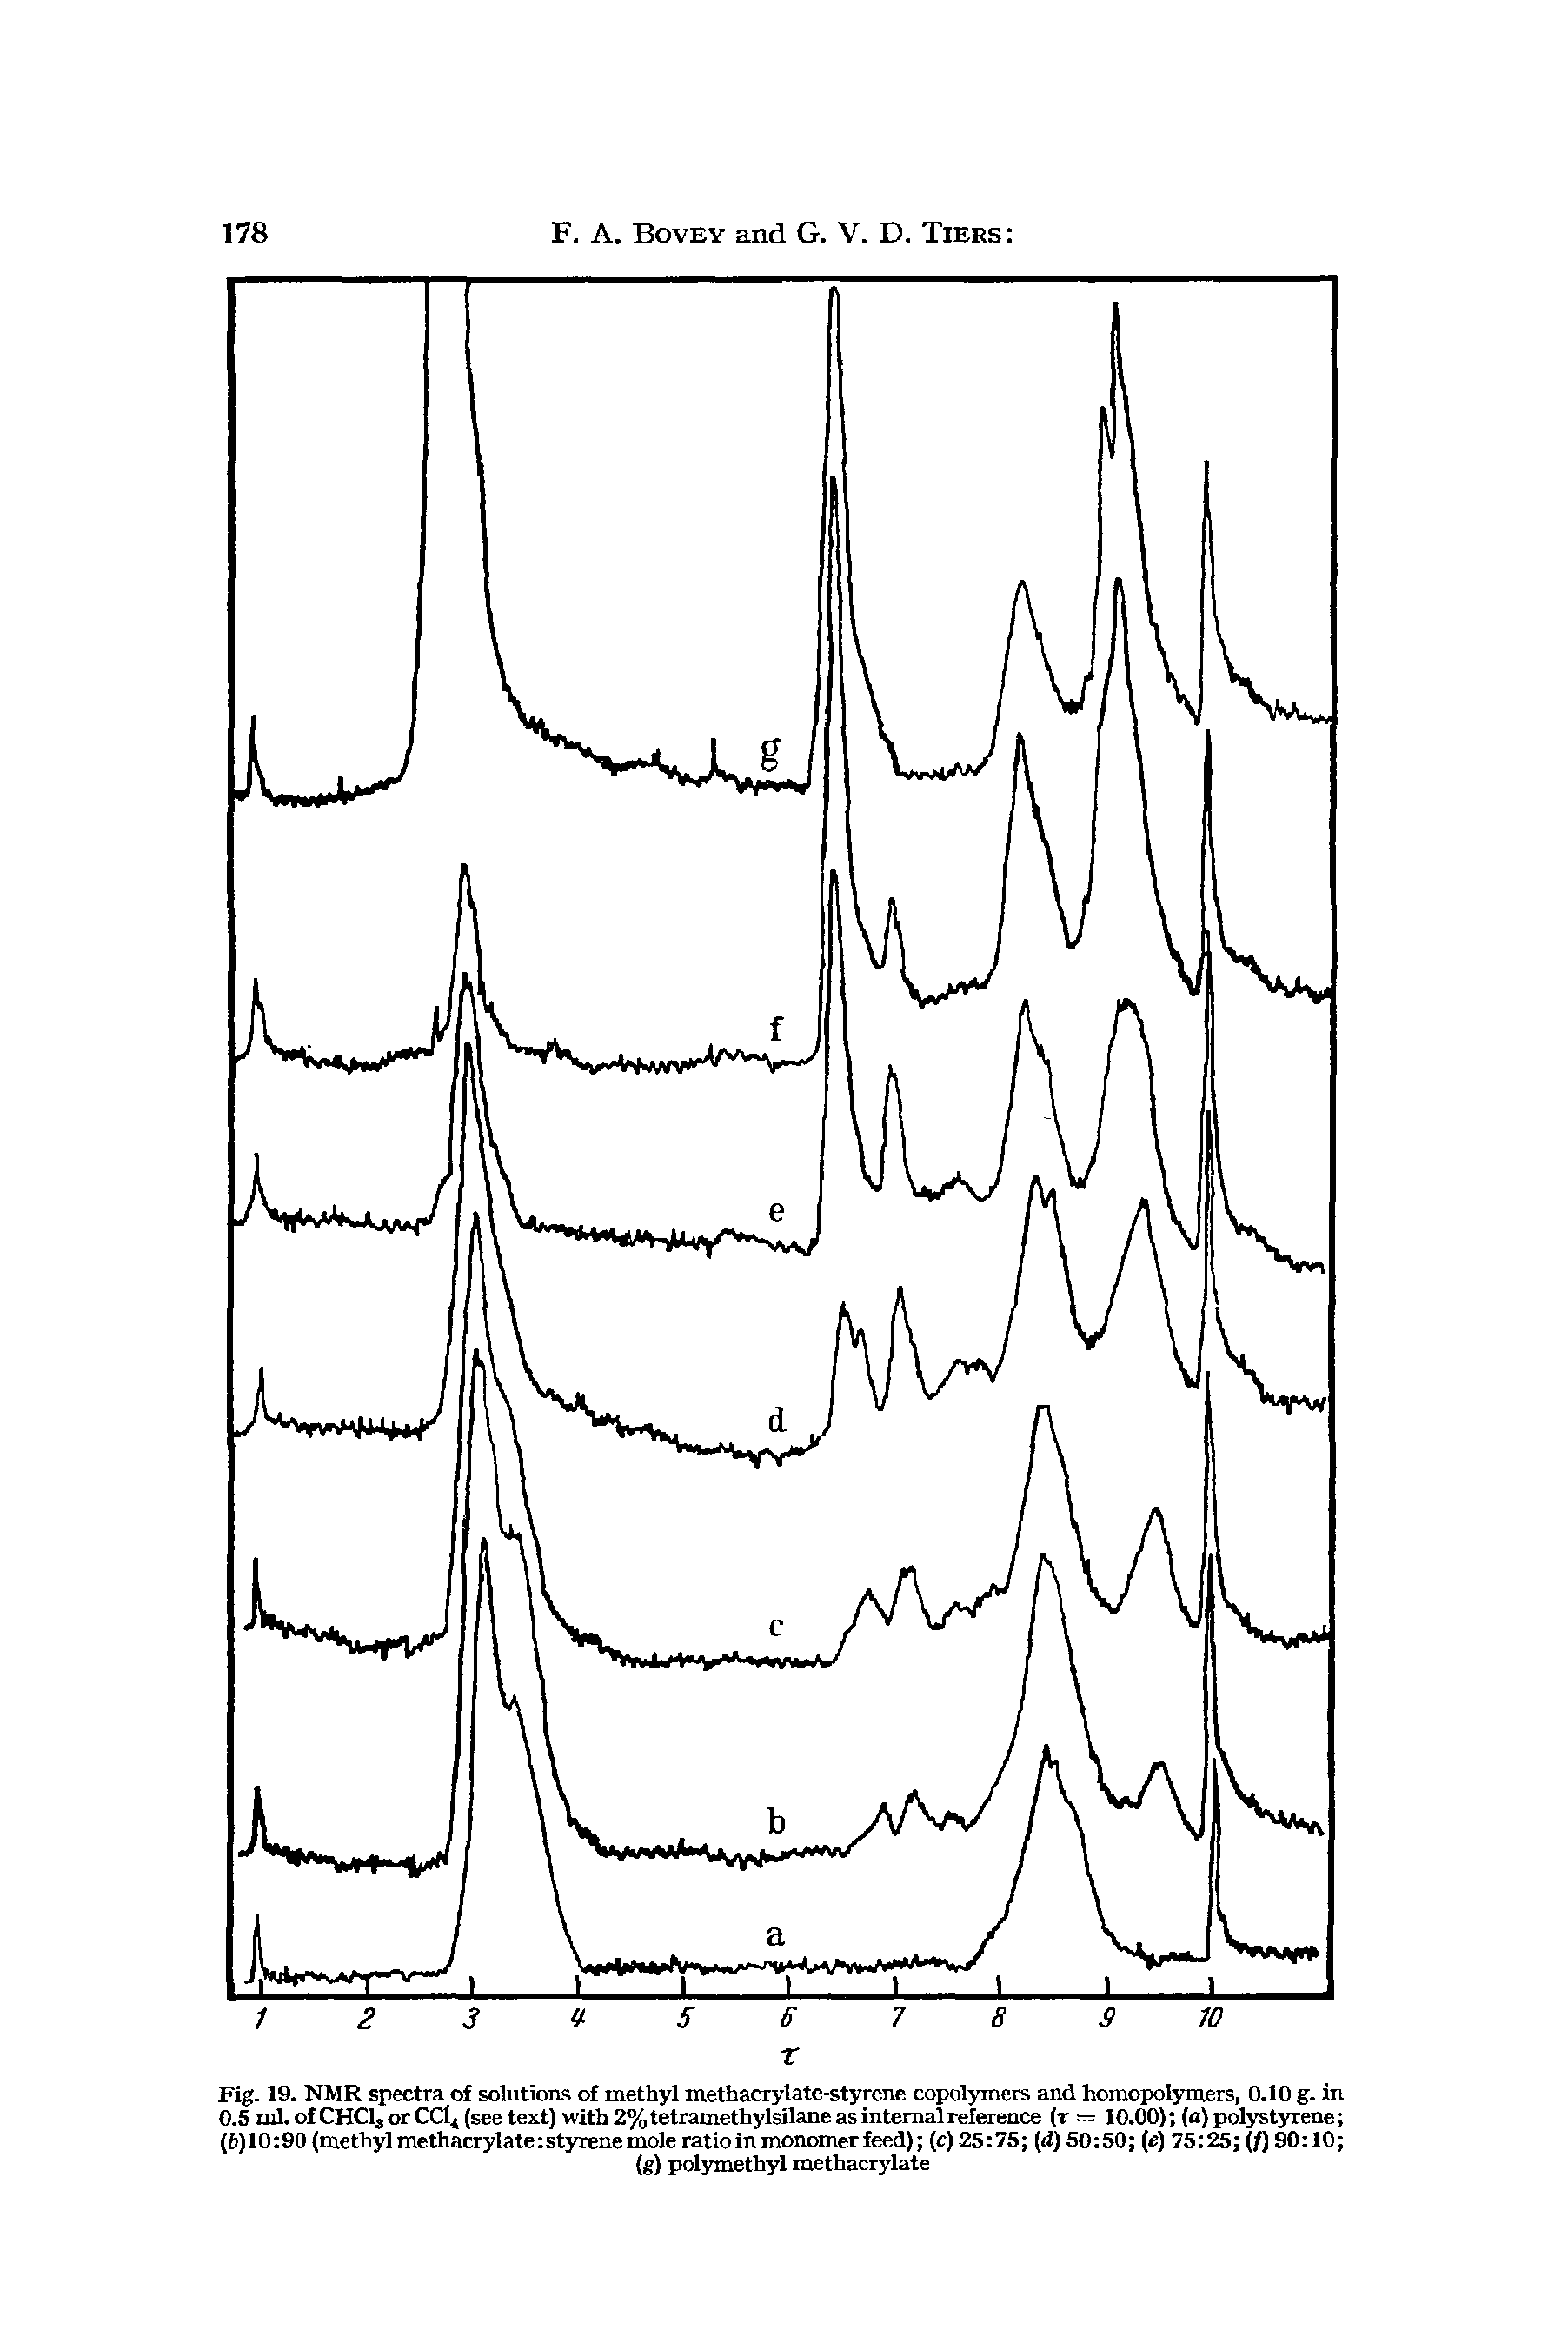 Fig. 19. NMR spectra of solutions of methyl methacrylate-styrene copolymers and homopolymers, 0.10 g. in 0.5 ml. of CHClj or CCl (see text) with 2% tetramethylsilane as internal reference (r = 10.00) (a) polystyrene ( )10 90 (methyl methacrylate styrene mole ratio in monomer feed) (c) 25 75 [d) 50 50 e) 75 25 (/) 90 10 ...